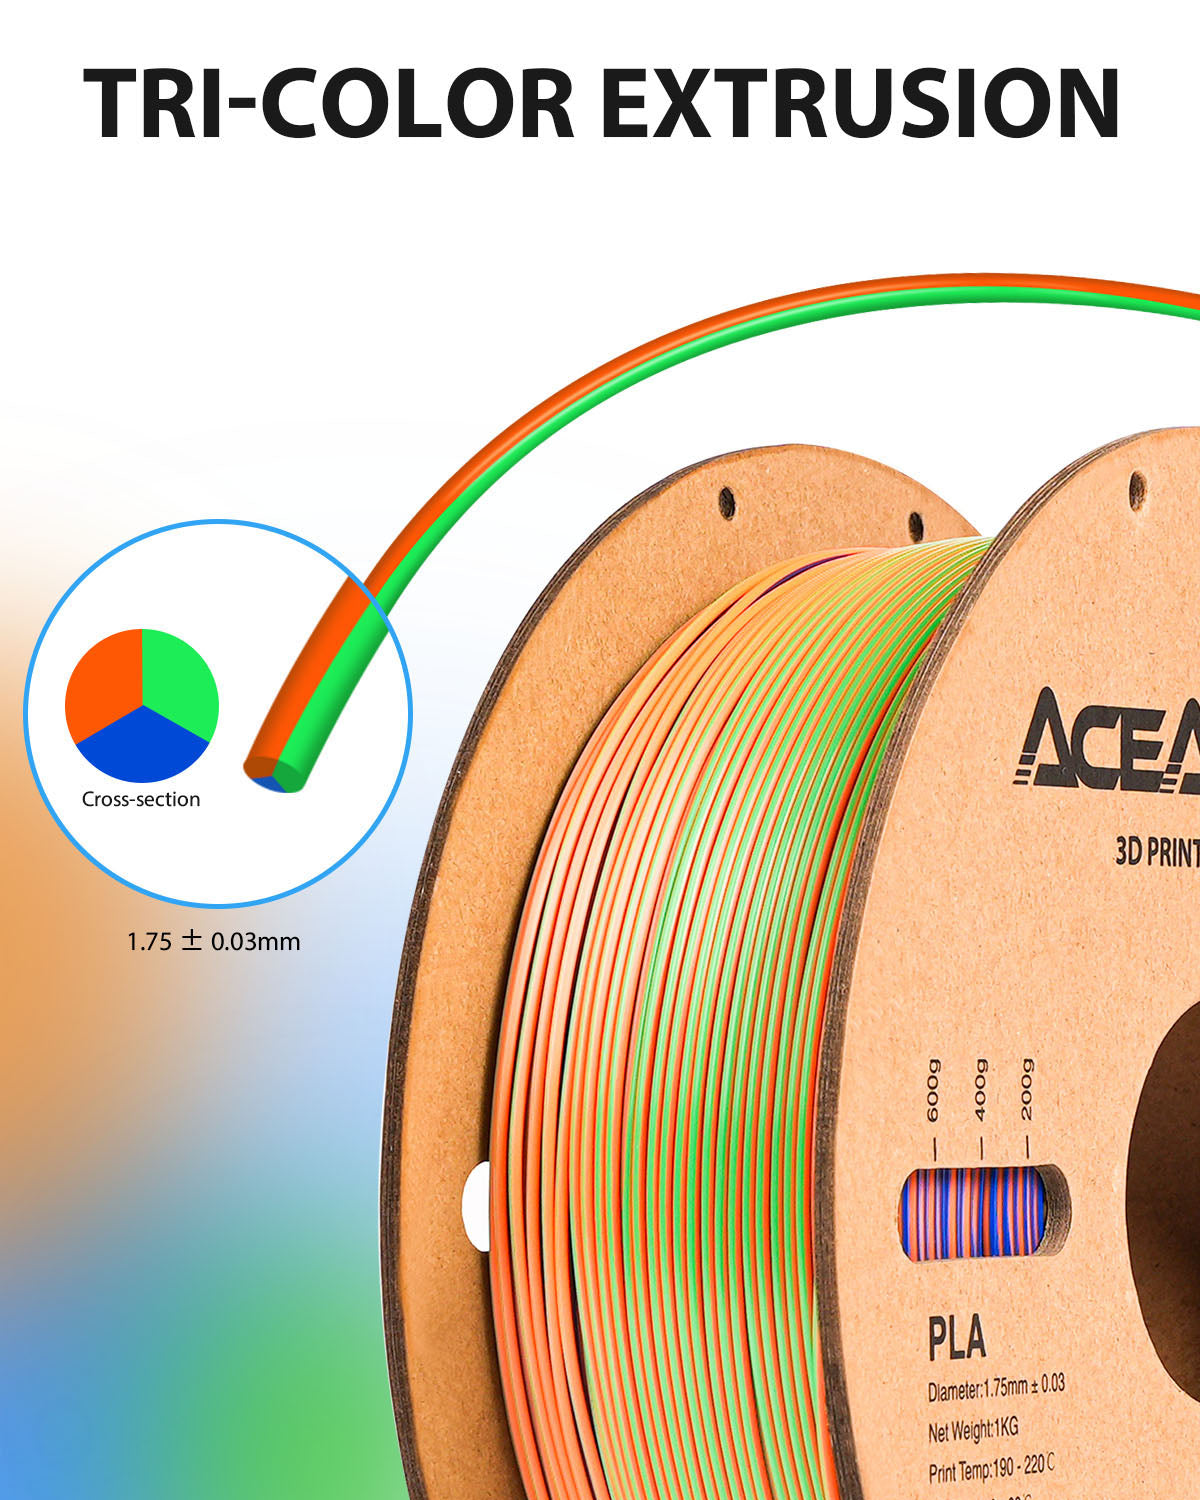 [Clearance Sale] Aceaddity Silk Multicolor PLA Get 4 at the Price of 3